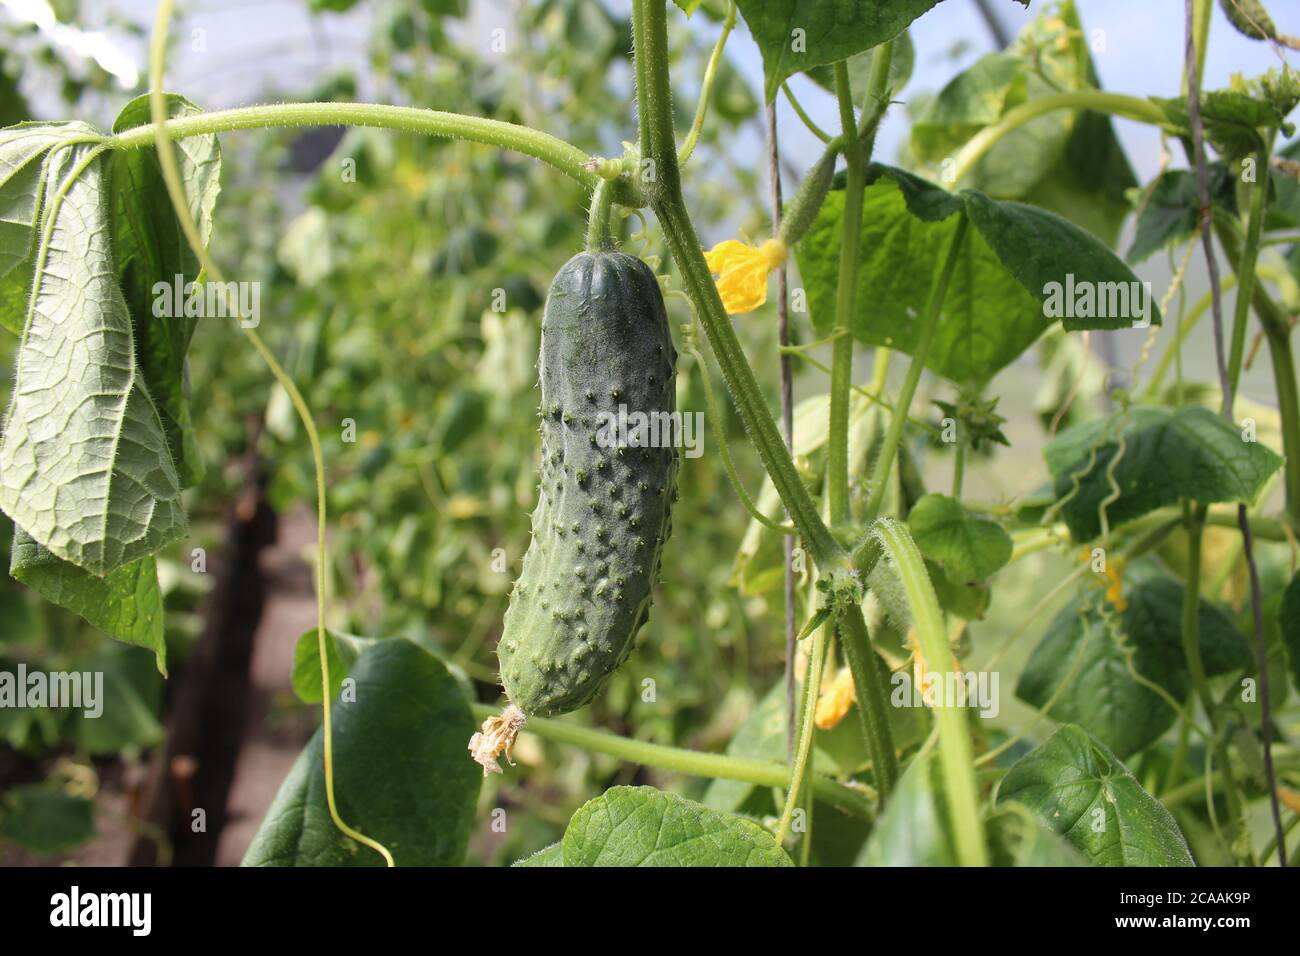 a young small cucumber grows on a branch in a greenhouse on the street in a garden plant growing gardening growing vegetables Stock Photo